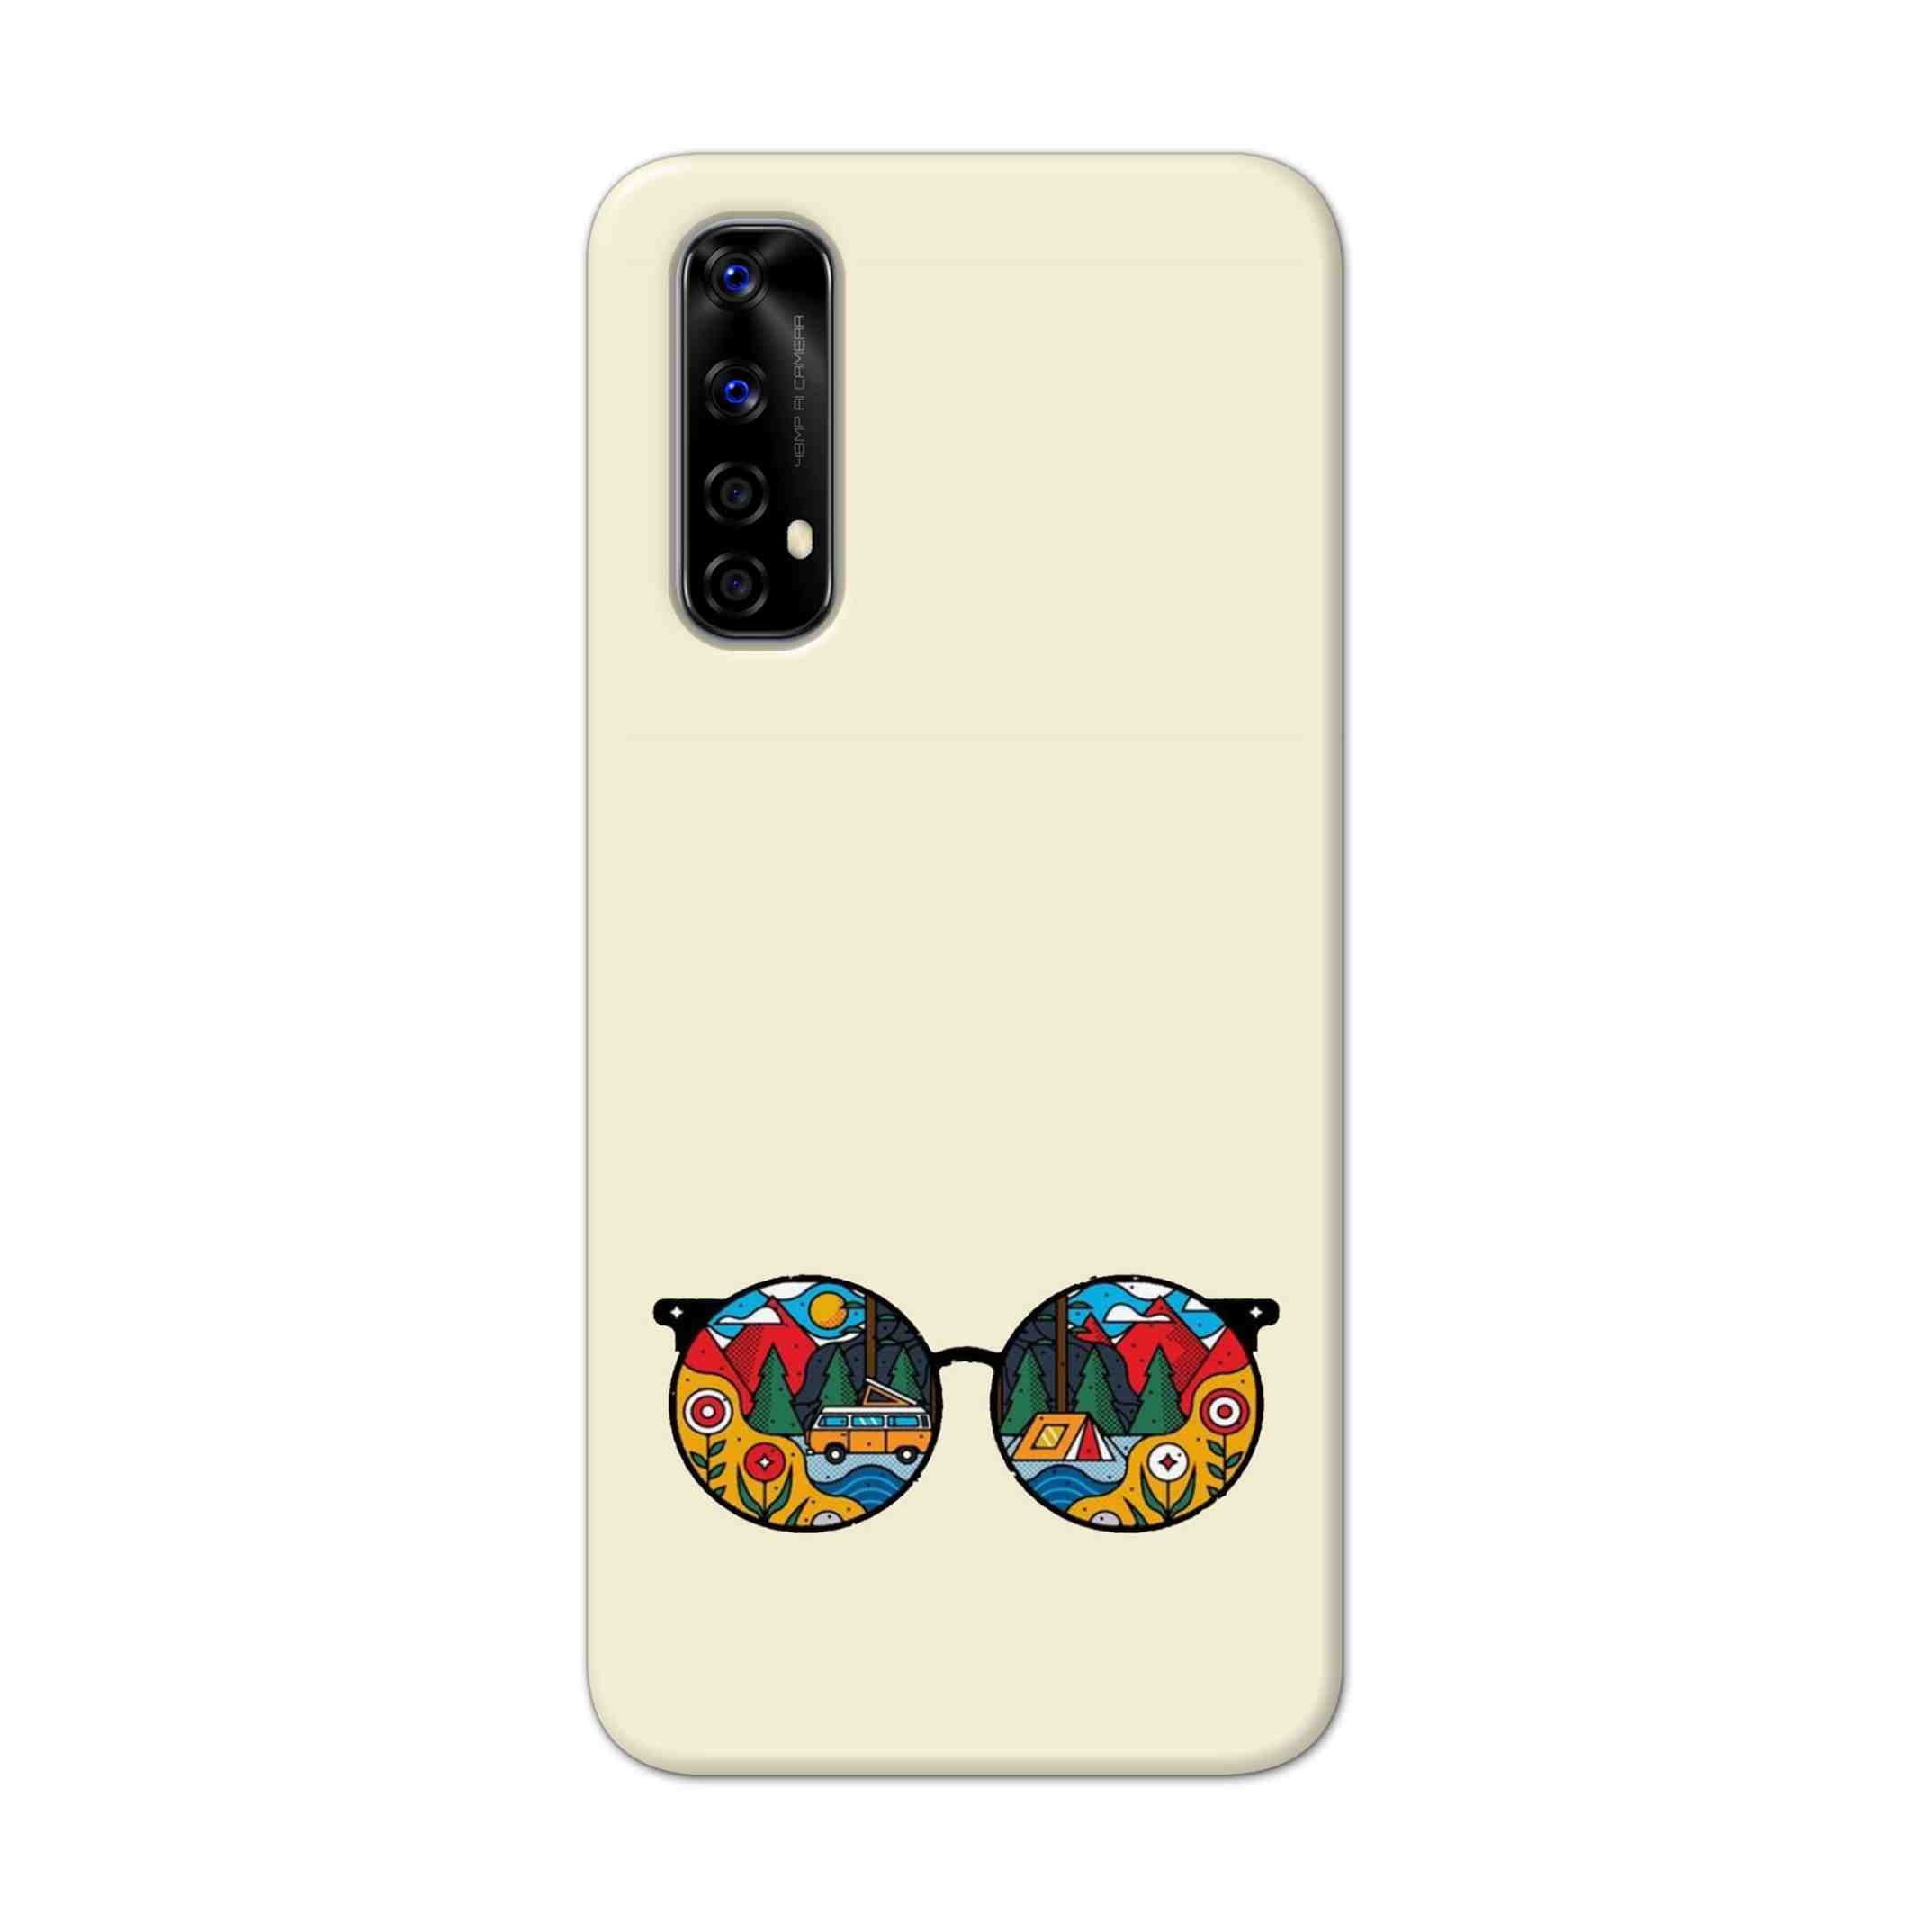 Buy Rainbow Sunglasses Hard Back Mobile Phone Case Cover For Realme Narzo 20 Pro Online